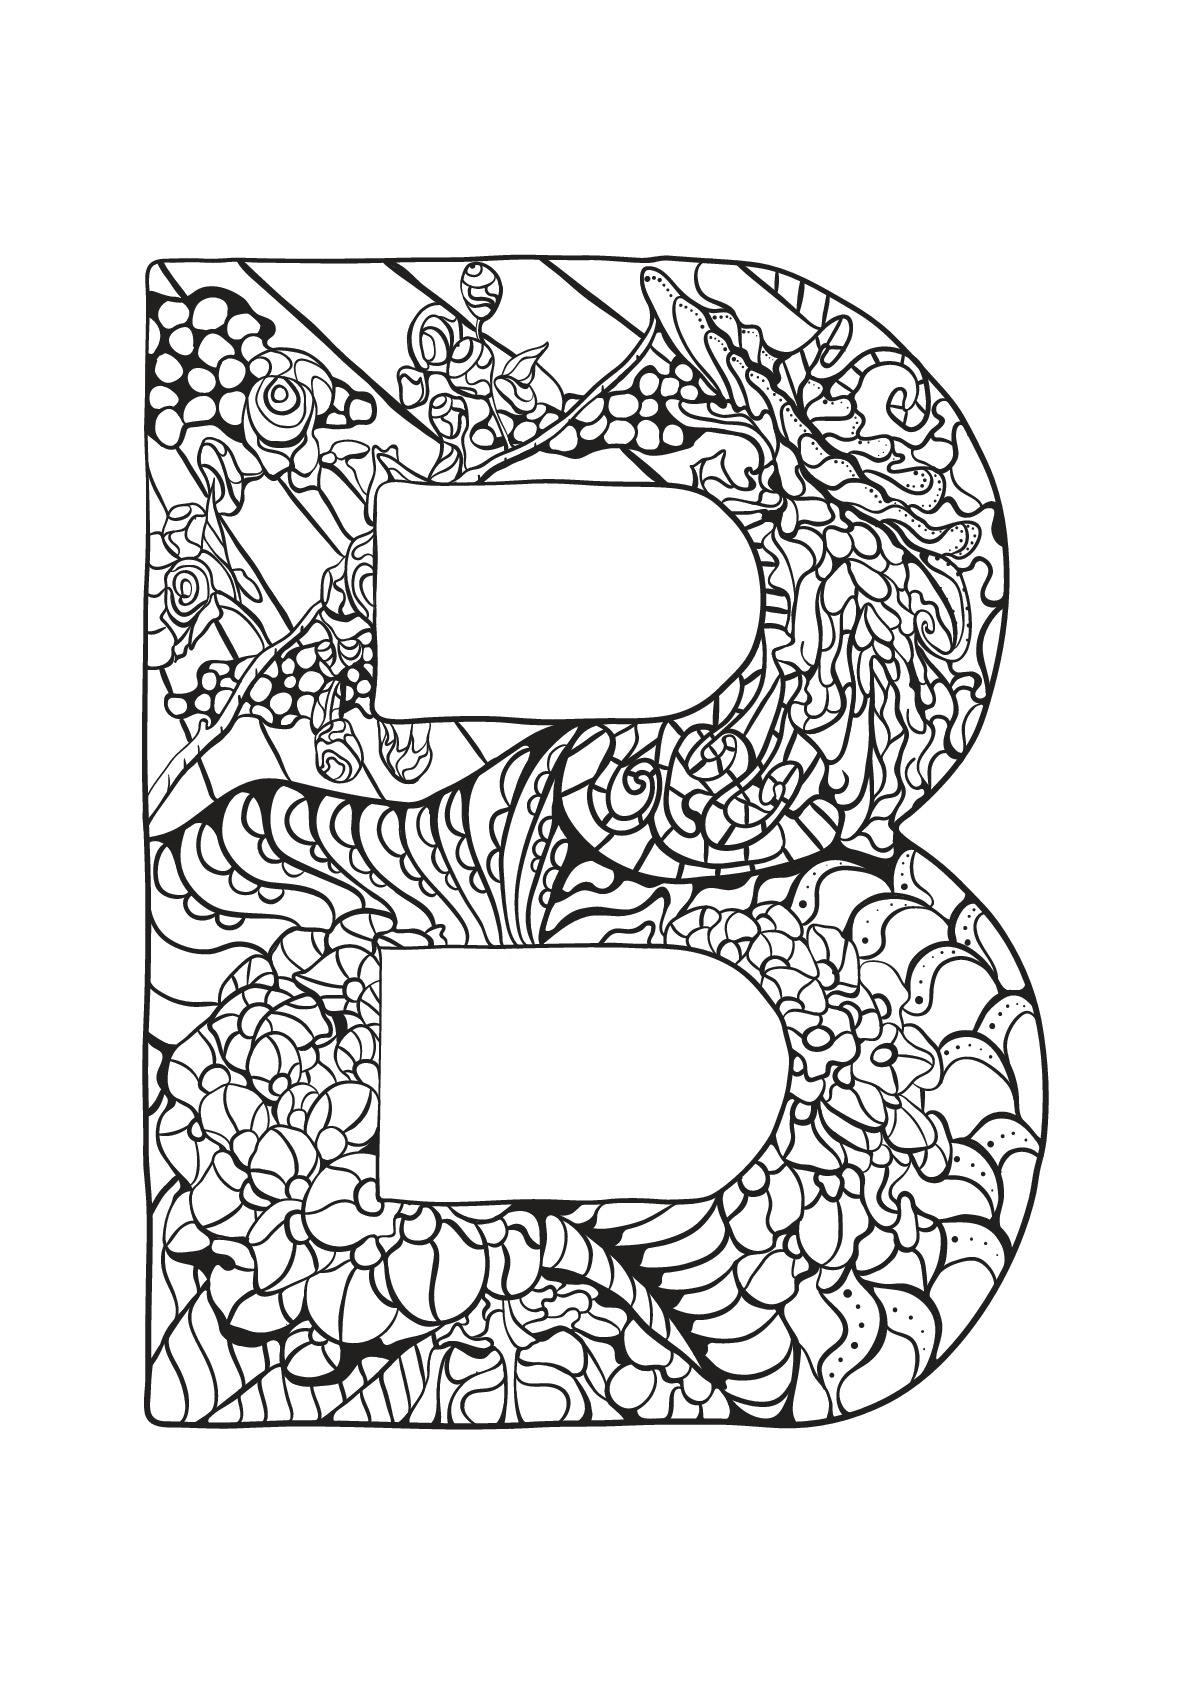 Alphabet to download for free : B - Alphabet Kids Coloring ...